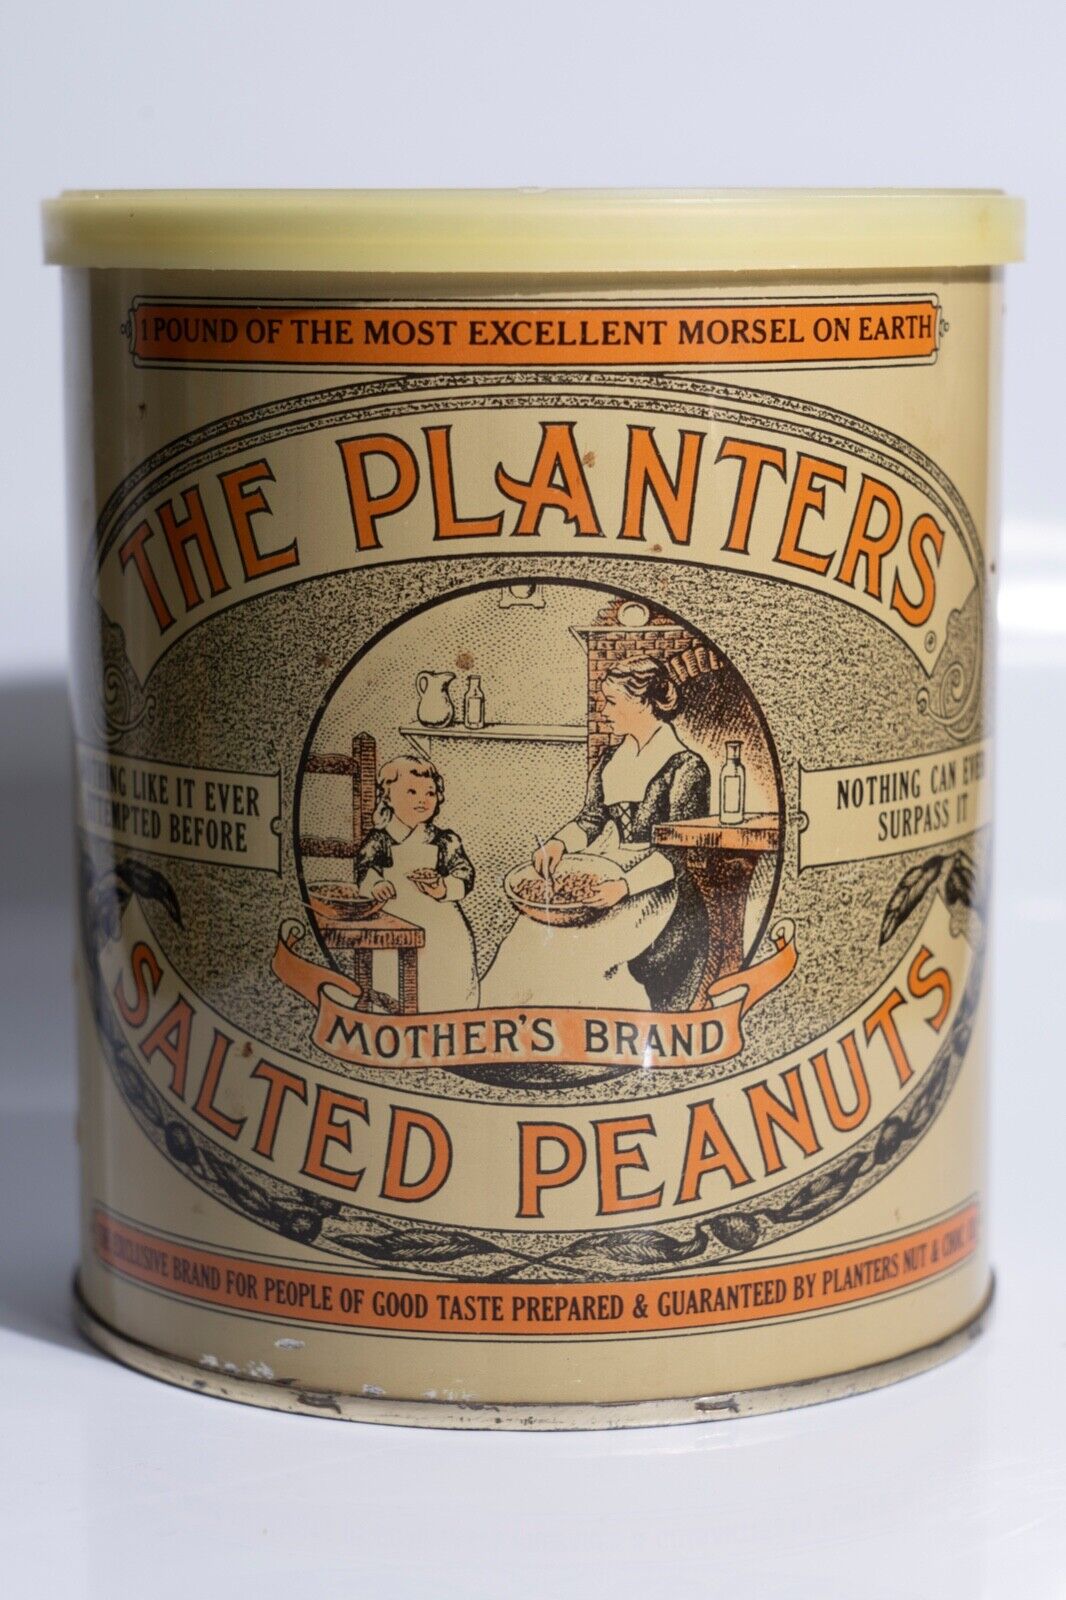 VINTAGE 1981 THE PLANTERS SALTED PEANUTS MOTHER'S BRAND ADVERTISING TIN CAN 75yr